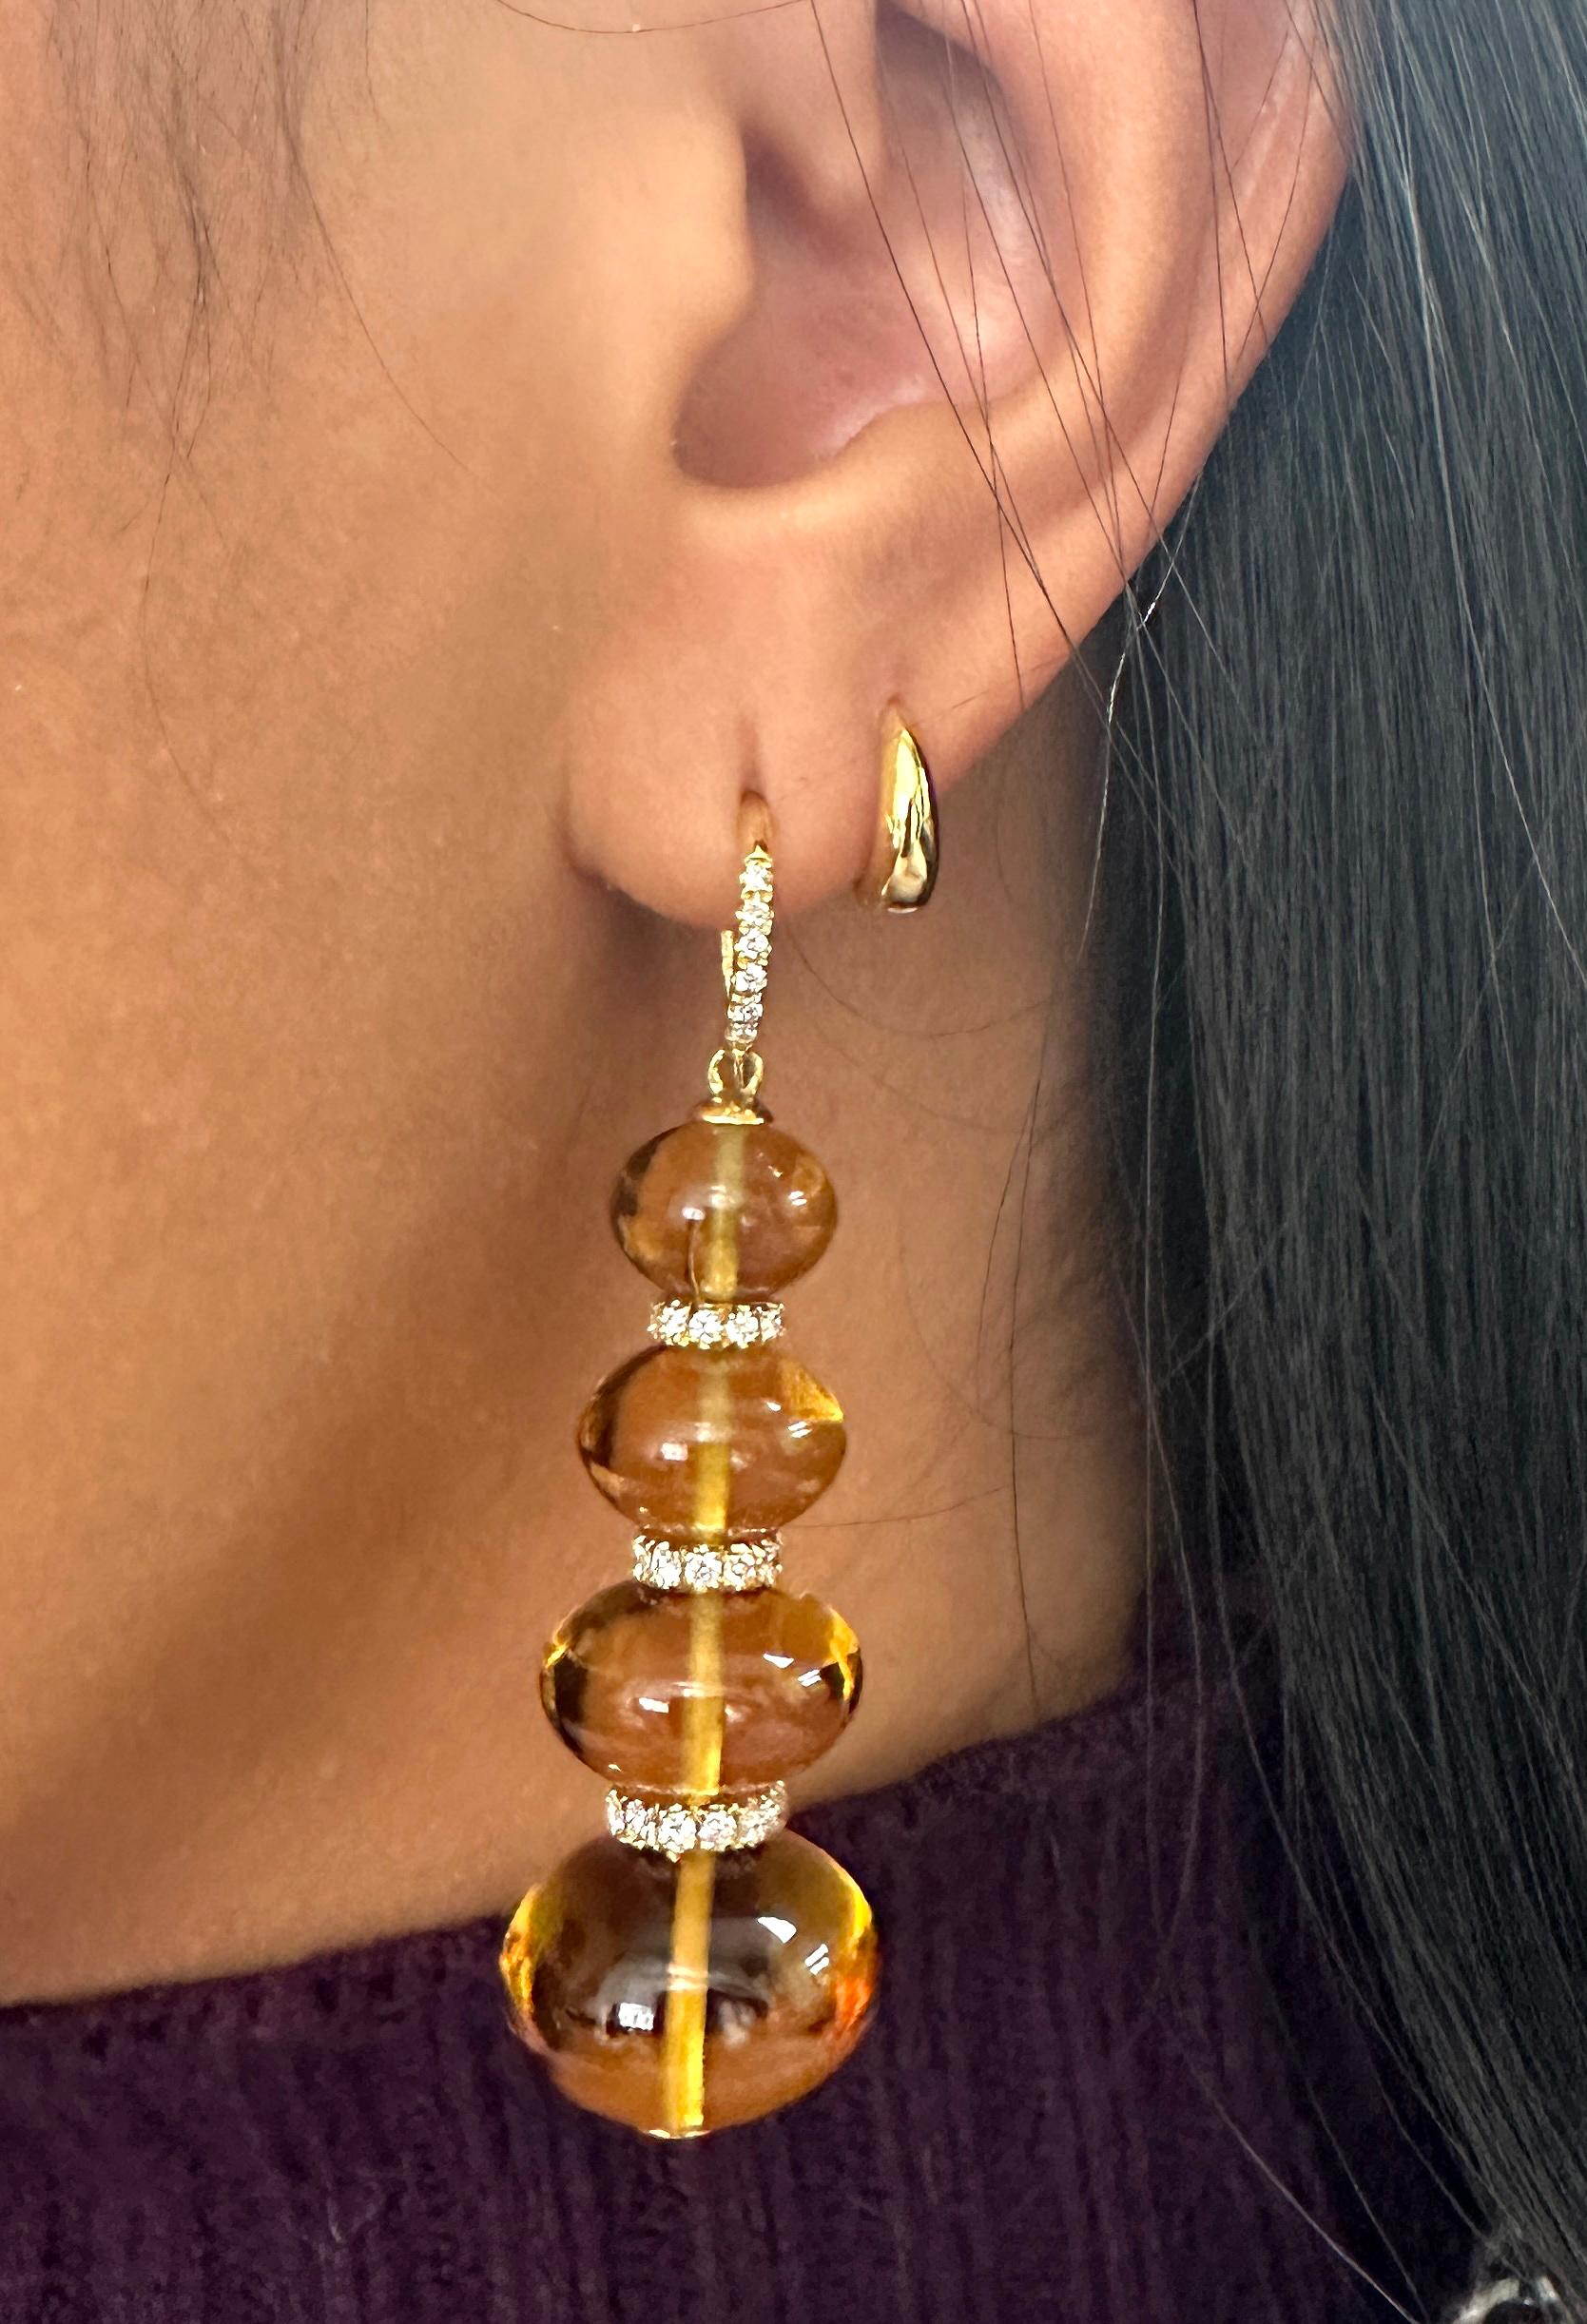 These 4 Tier Citrine Bead Earrings with Diamond Hook & Diamond Rondels in 18K Yellow Gold are a stunning piece from the 'Beyond' Collection. These earrings feature four tiers of golden citrine beads that cascade from a diamond-studded hook, adding a